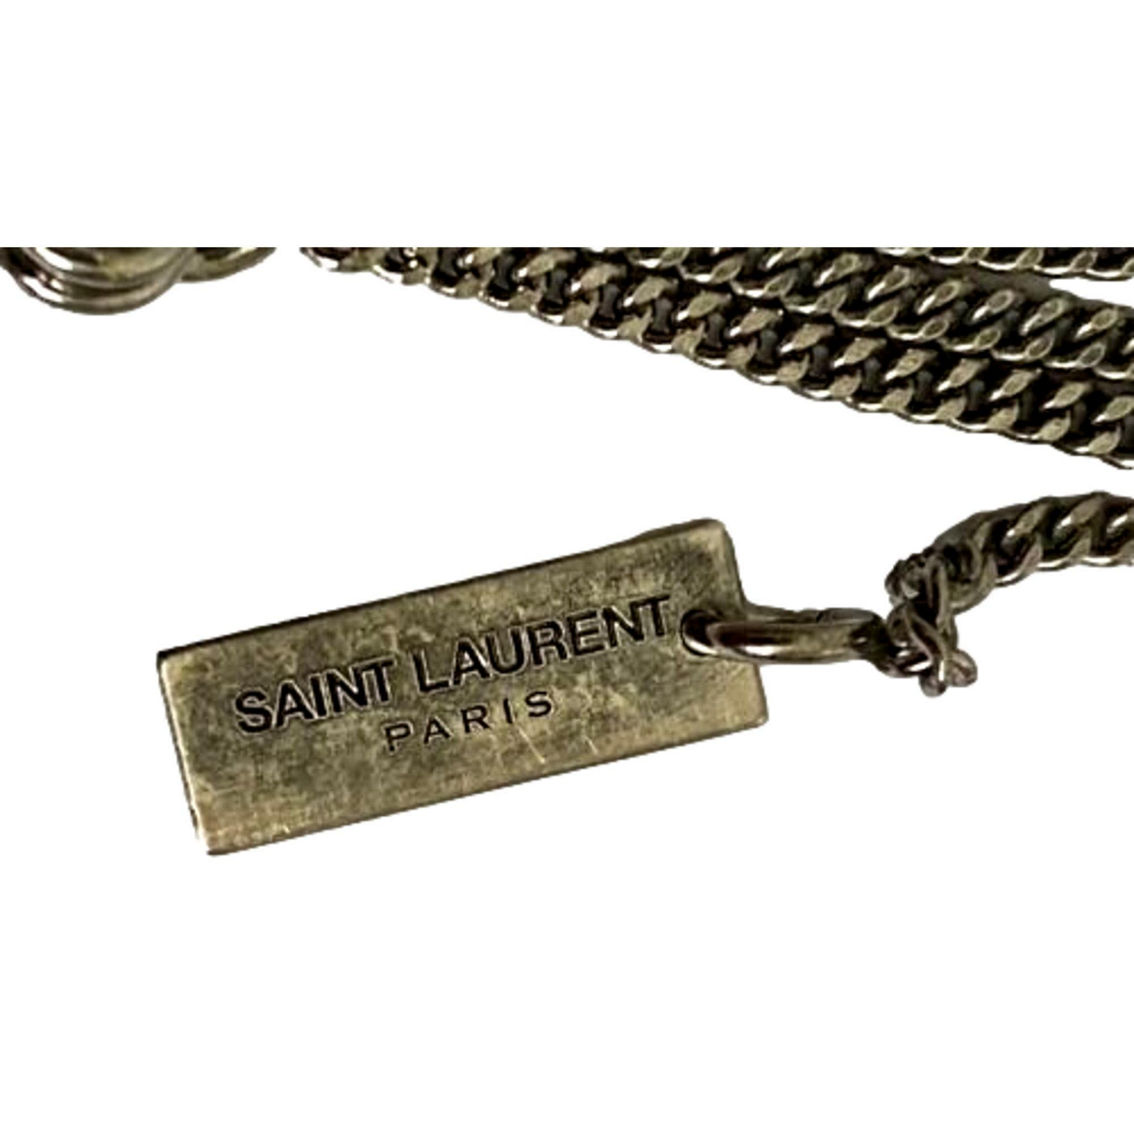 Saint Laurent Agate Necklace Orange Brown Stone Silver Brass Chain (New) - Image 3 of 4